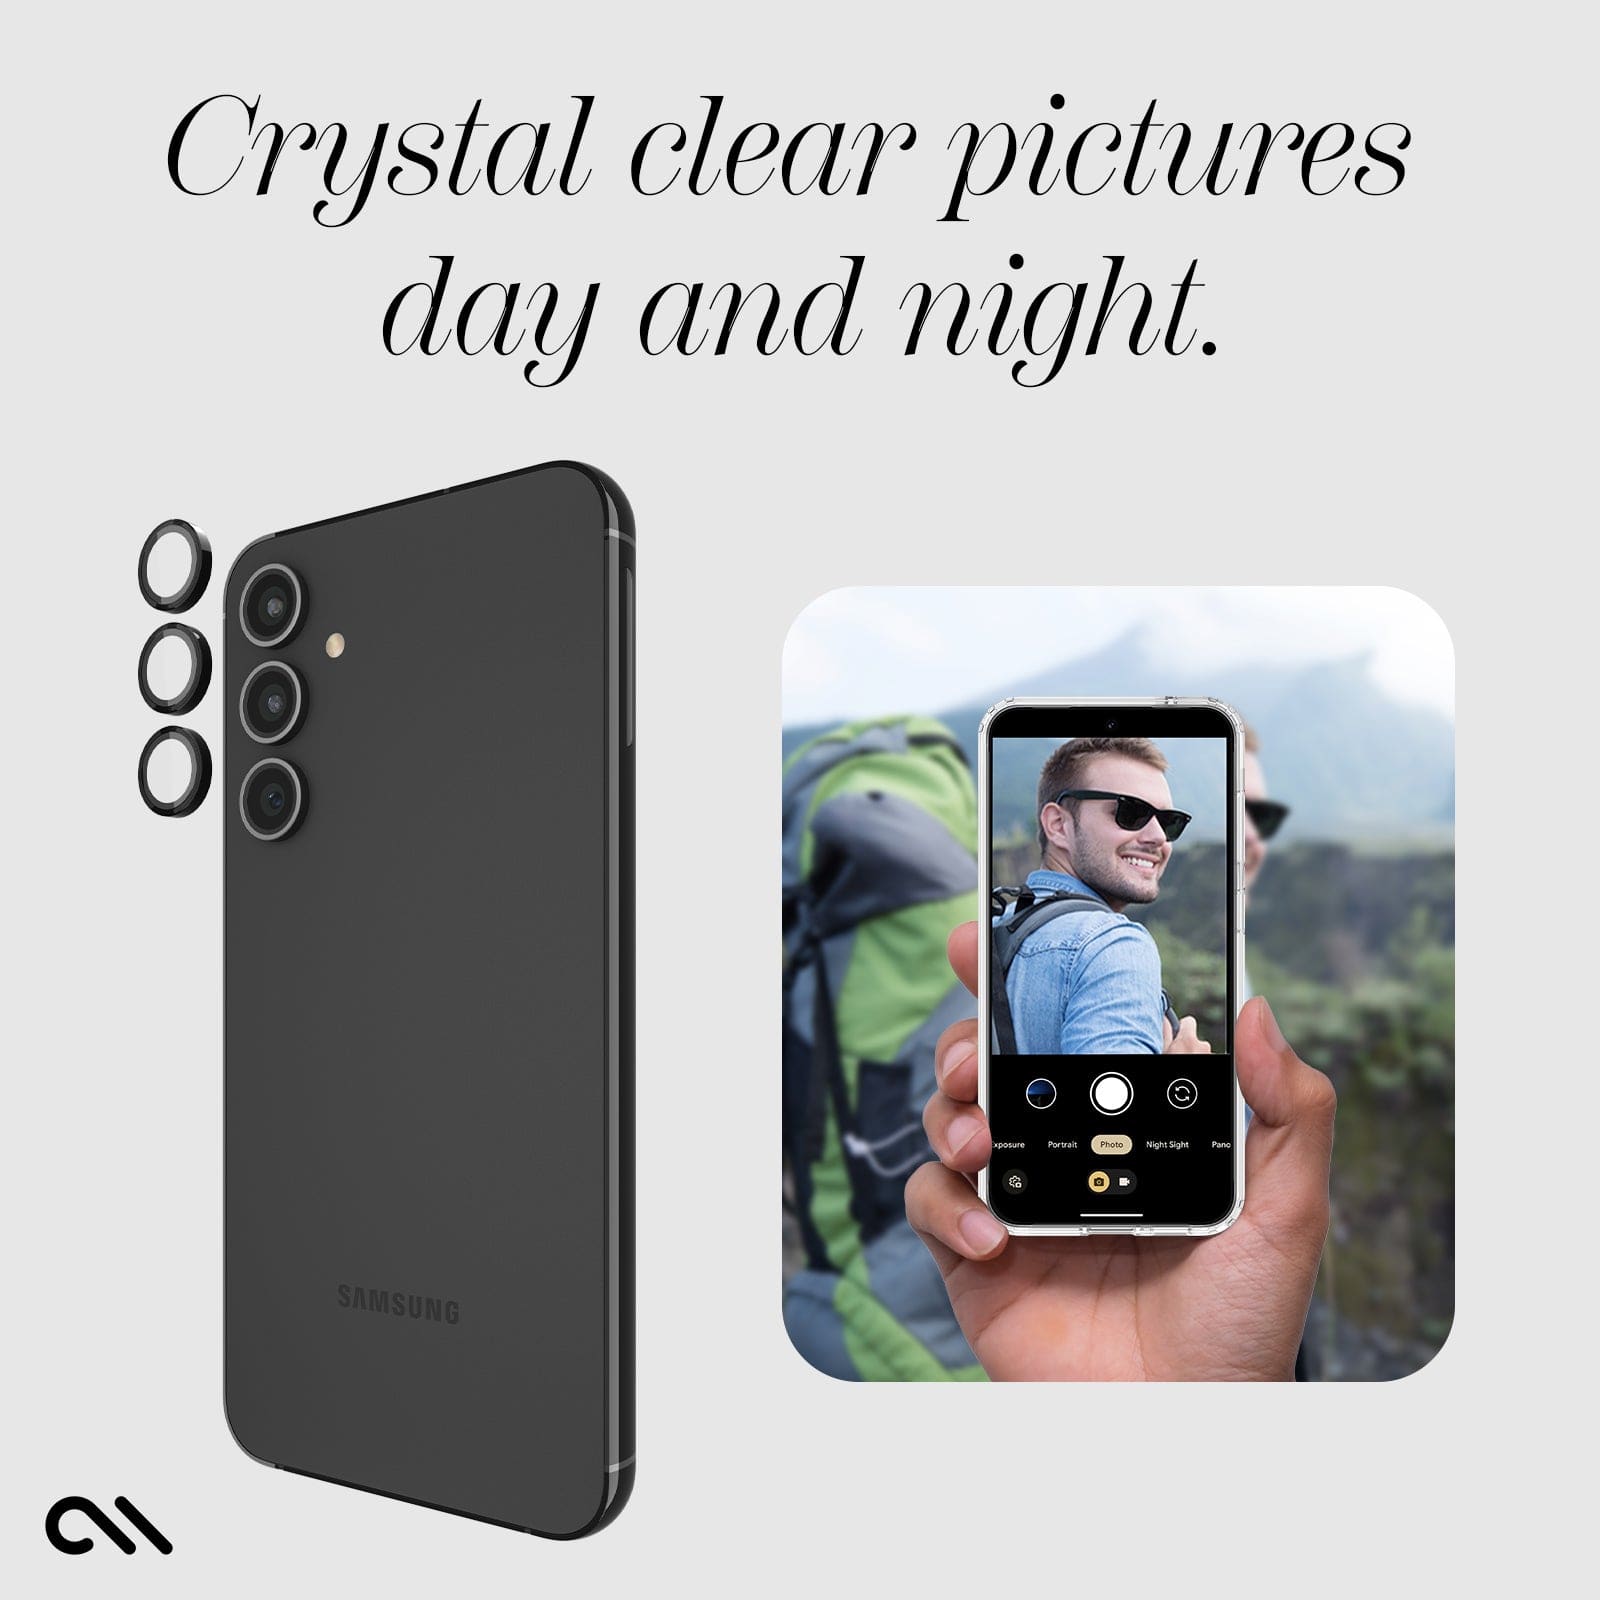 CRYSTAL CLEAR PICTURES DAY AND NGIHT